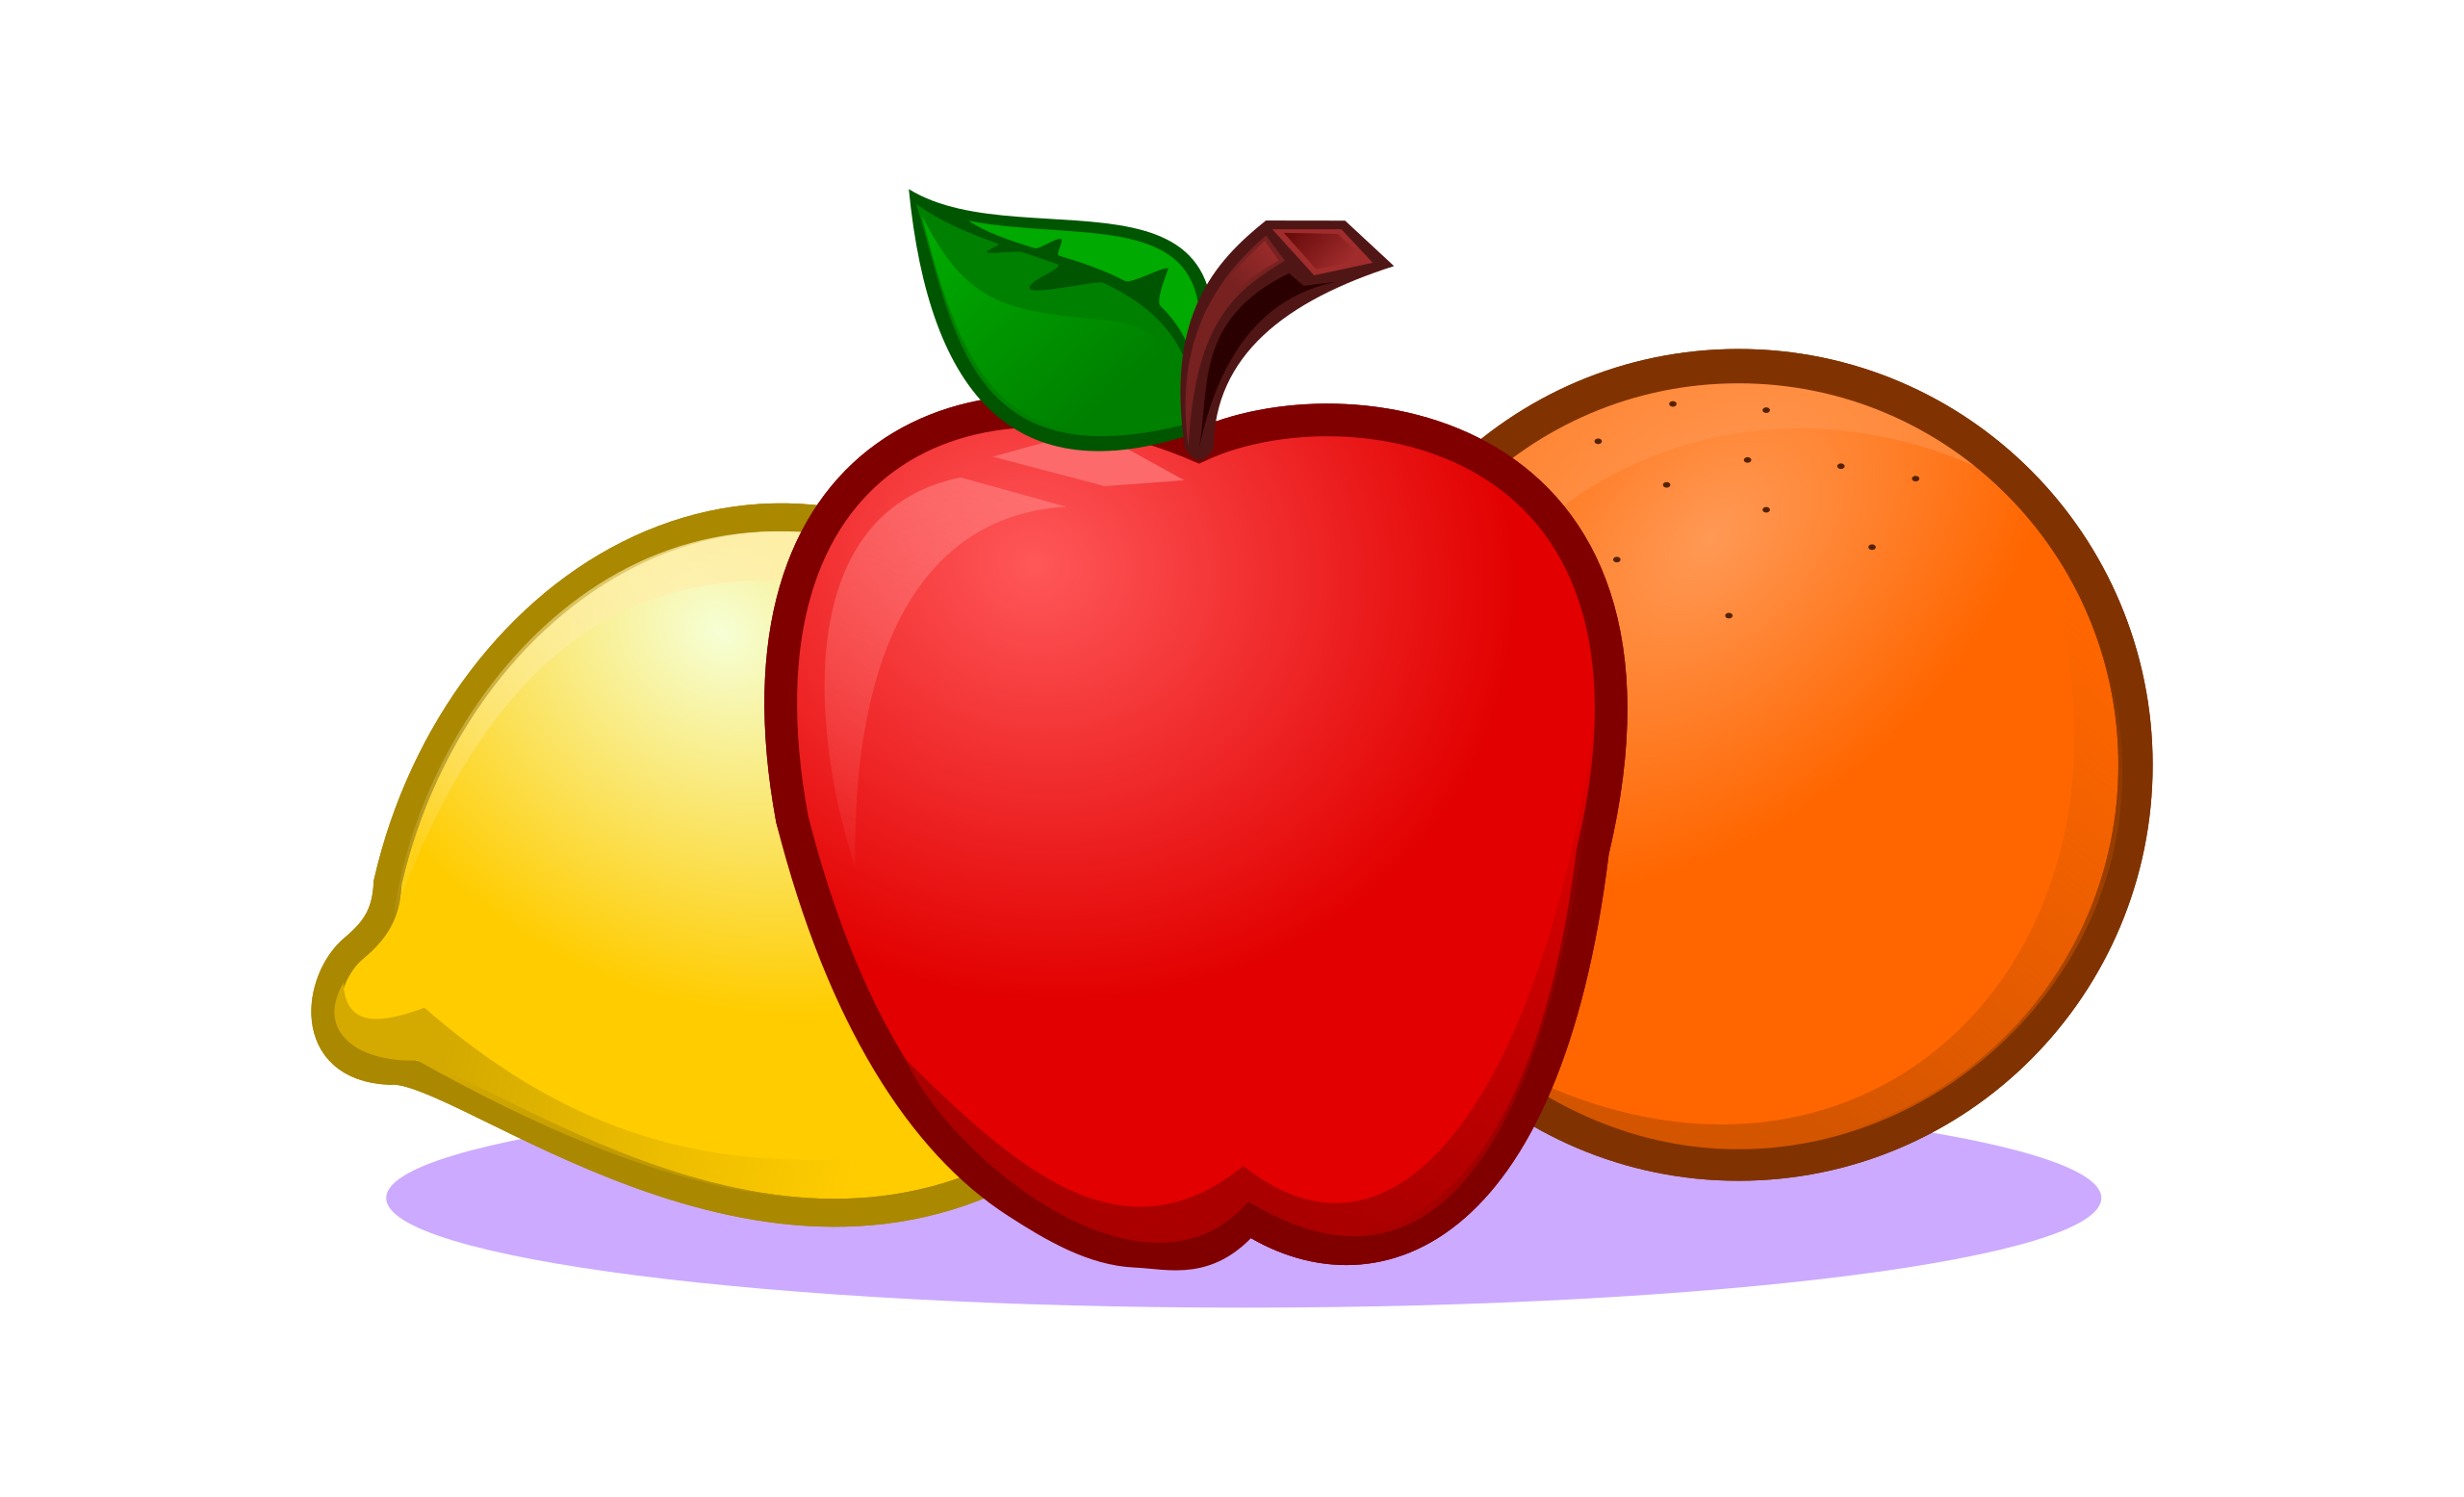 File:Red apple.svg - Wikimedia Commons